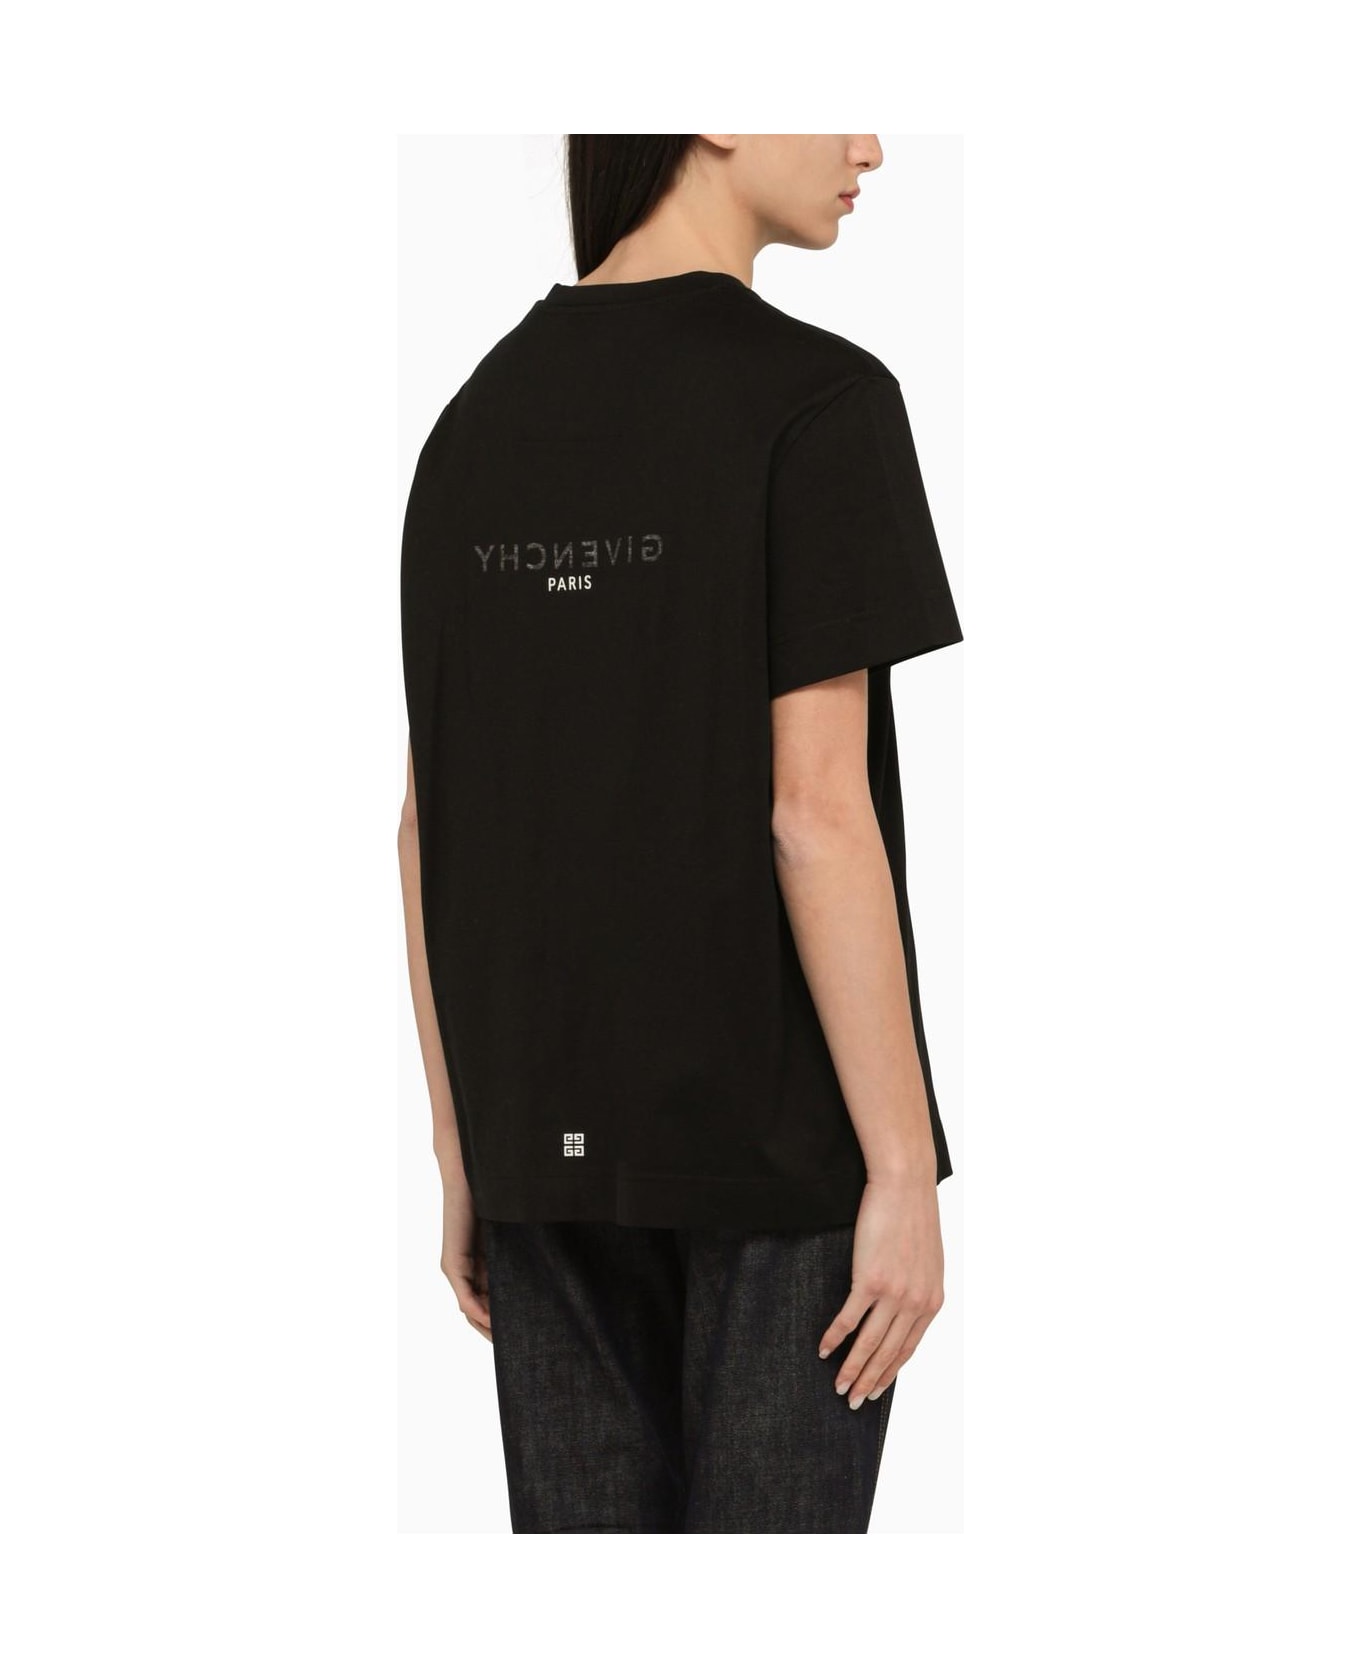 Givenchy Crew-neck T-shirt With Logo - black